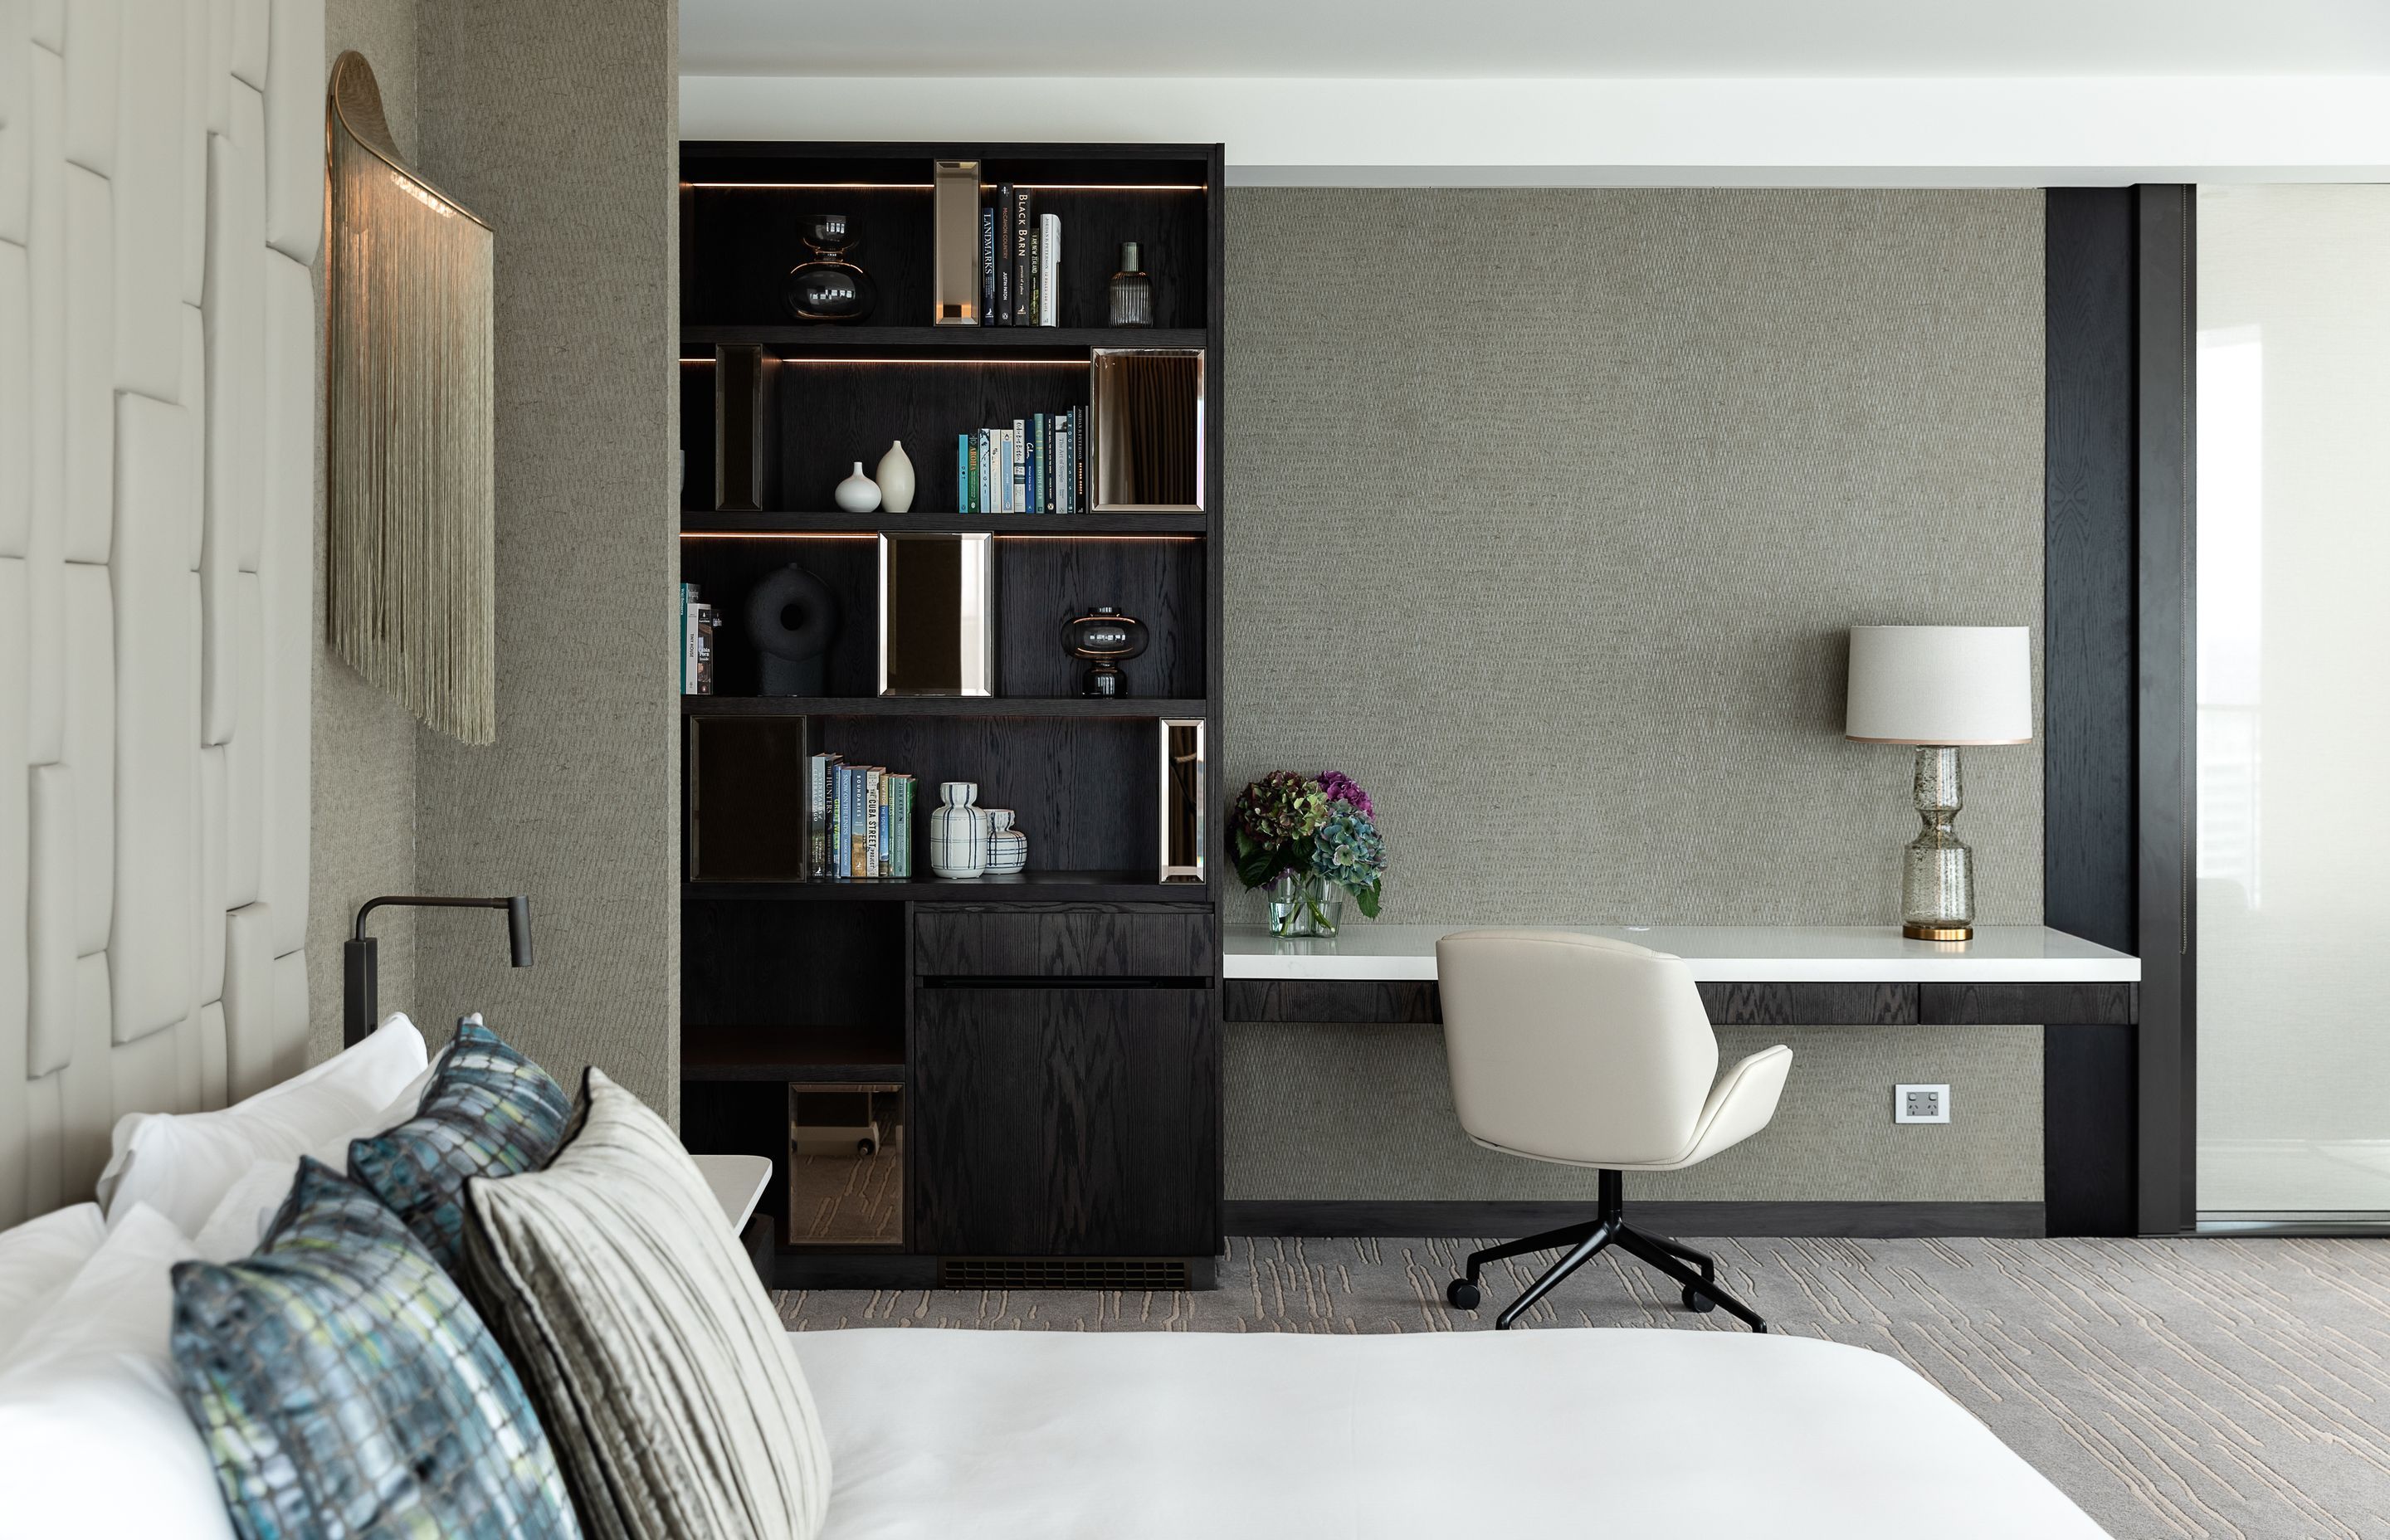 The colour palette of the rooms draws in the soothing biophilic colours of the surrounds.